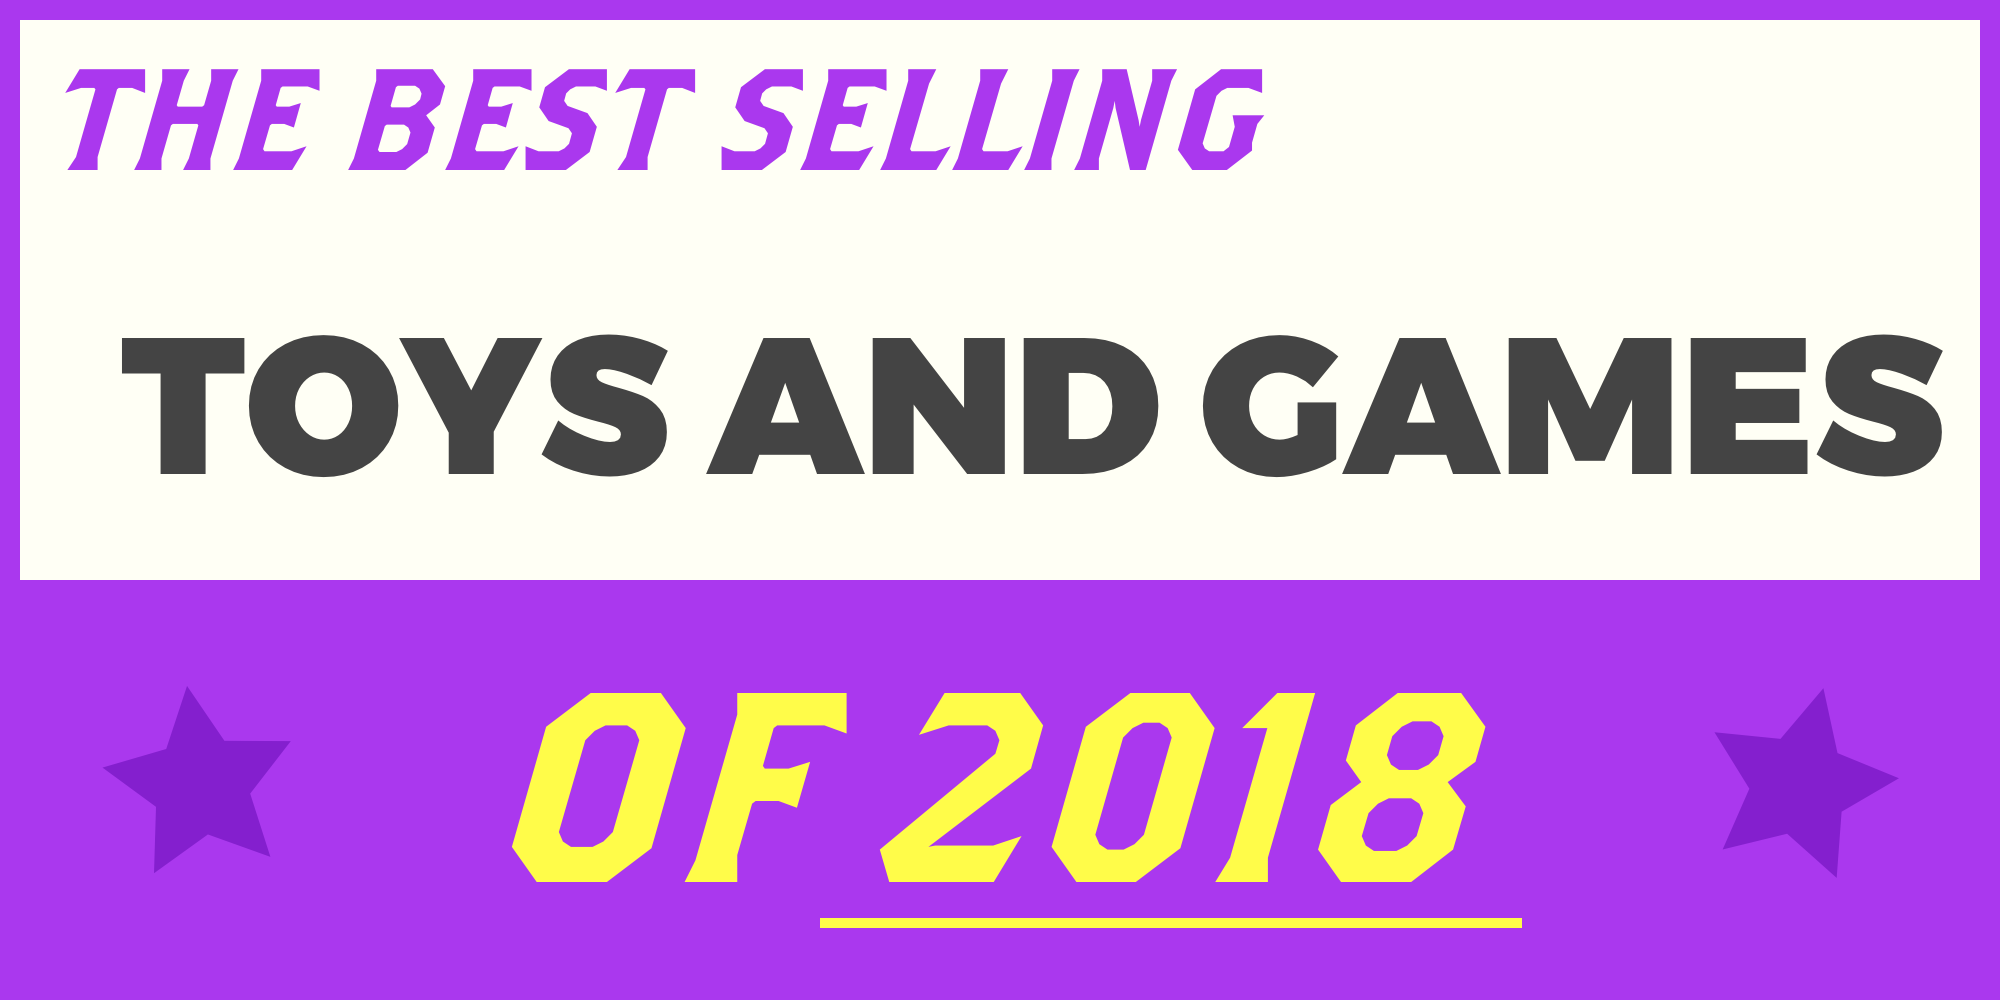 top selling toys for 2018